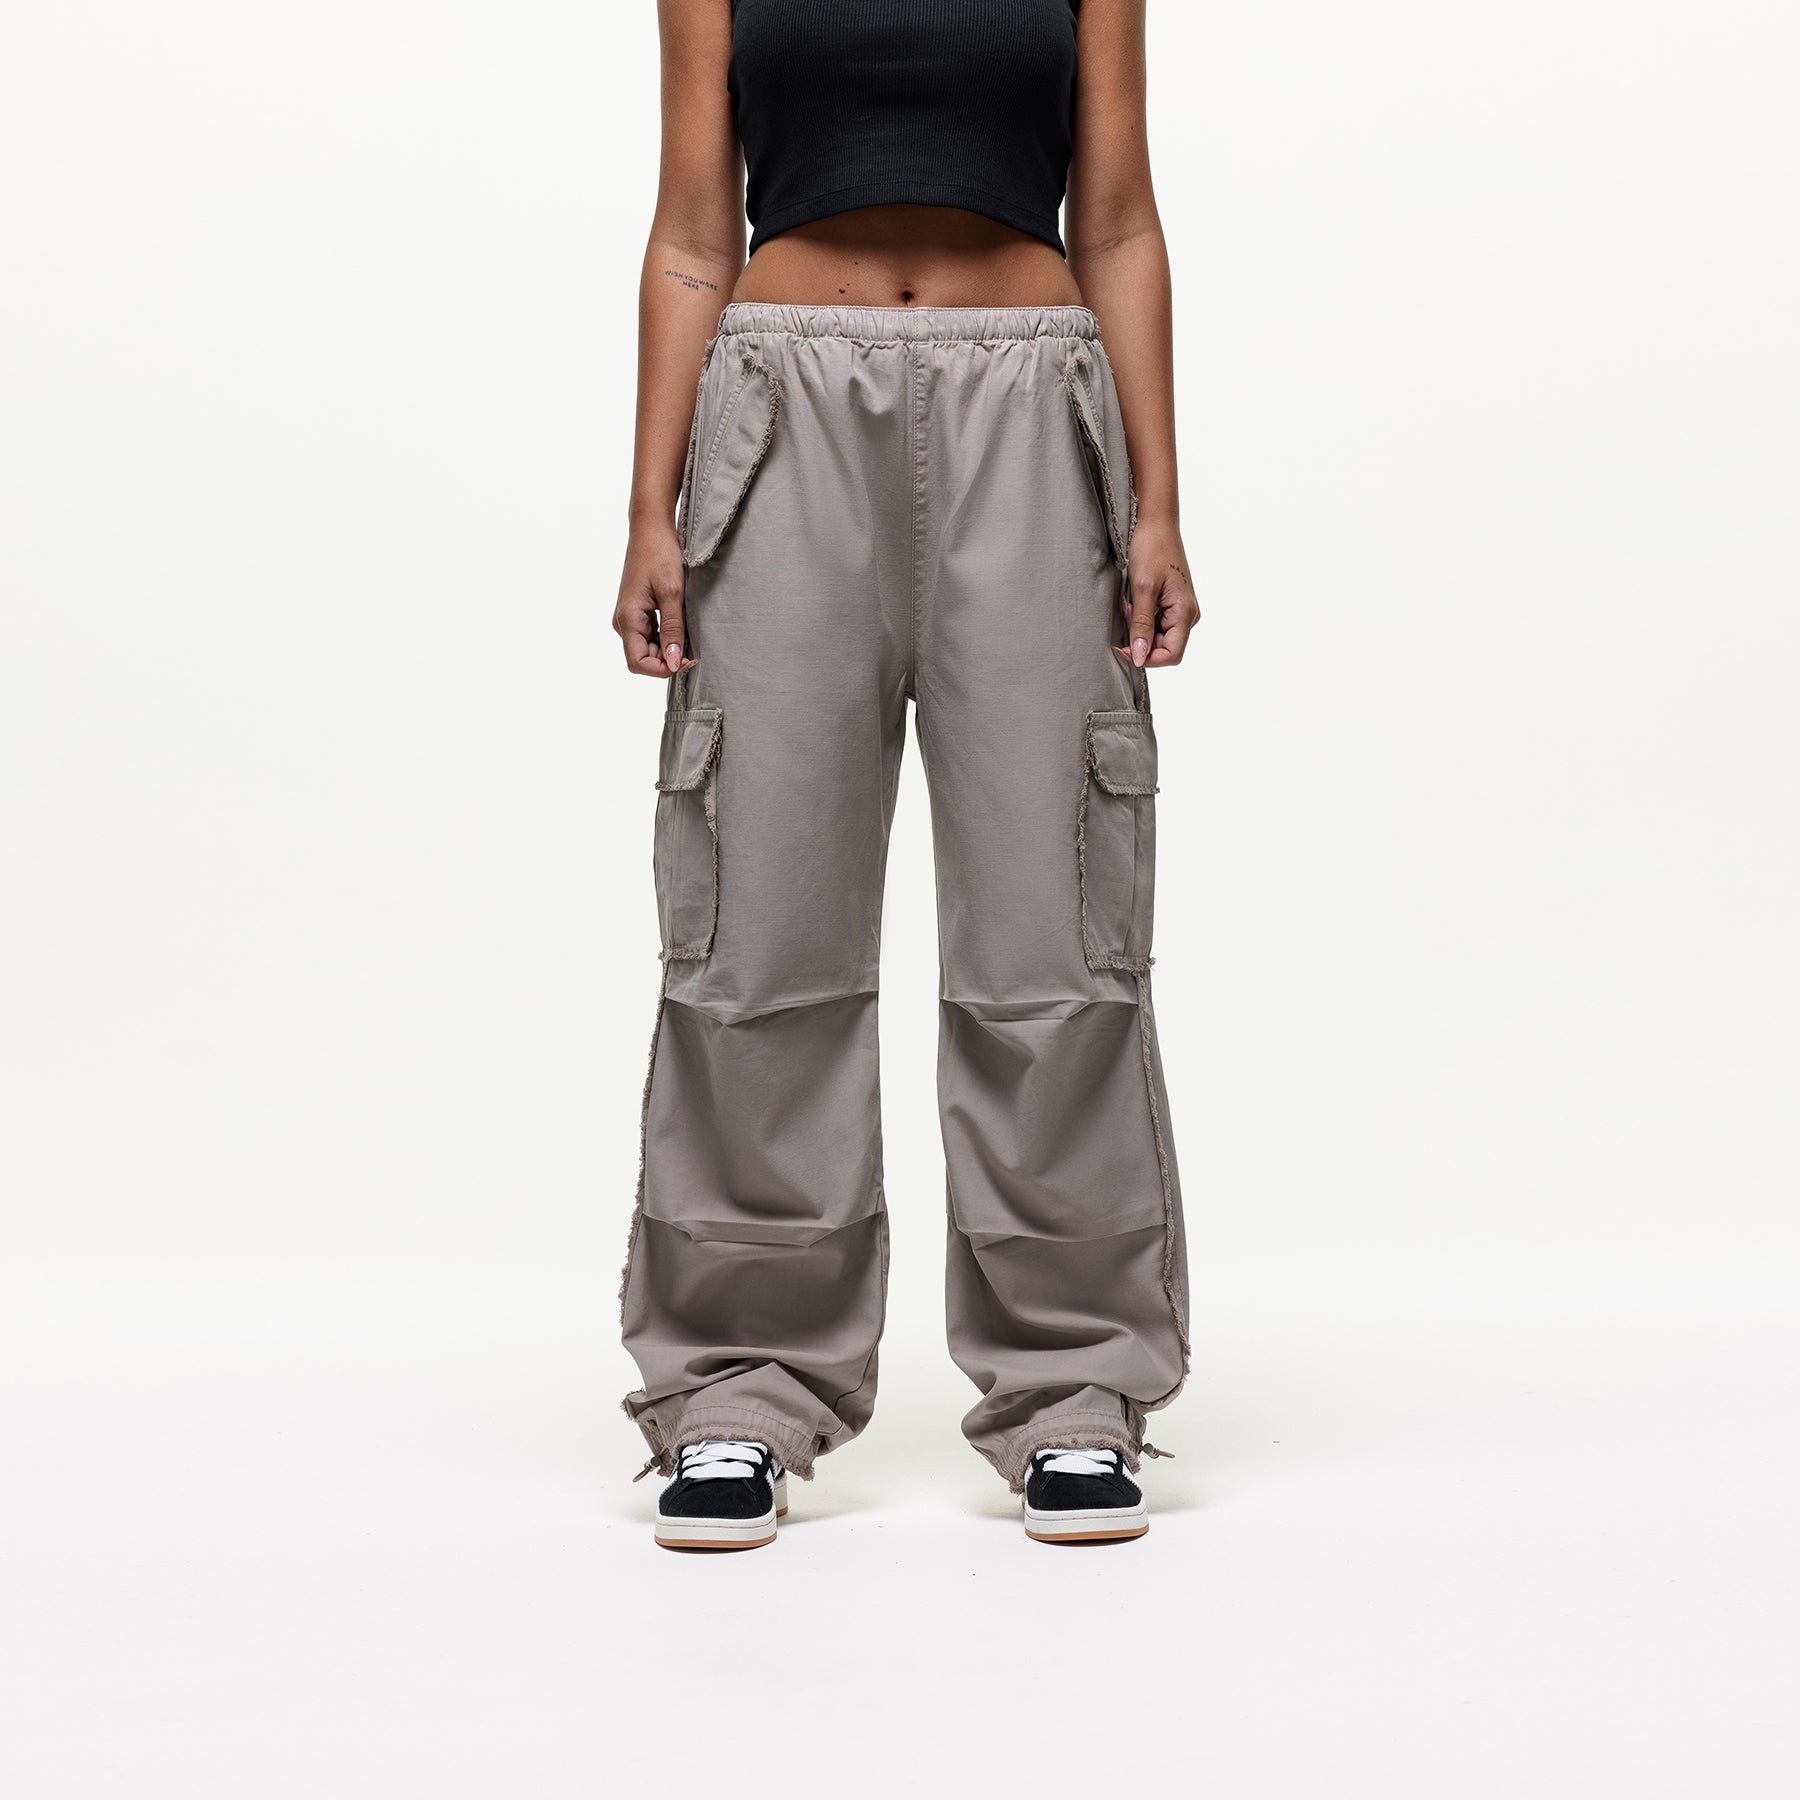 Distressed Taupe Cargo Pants